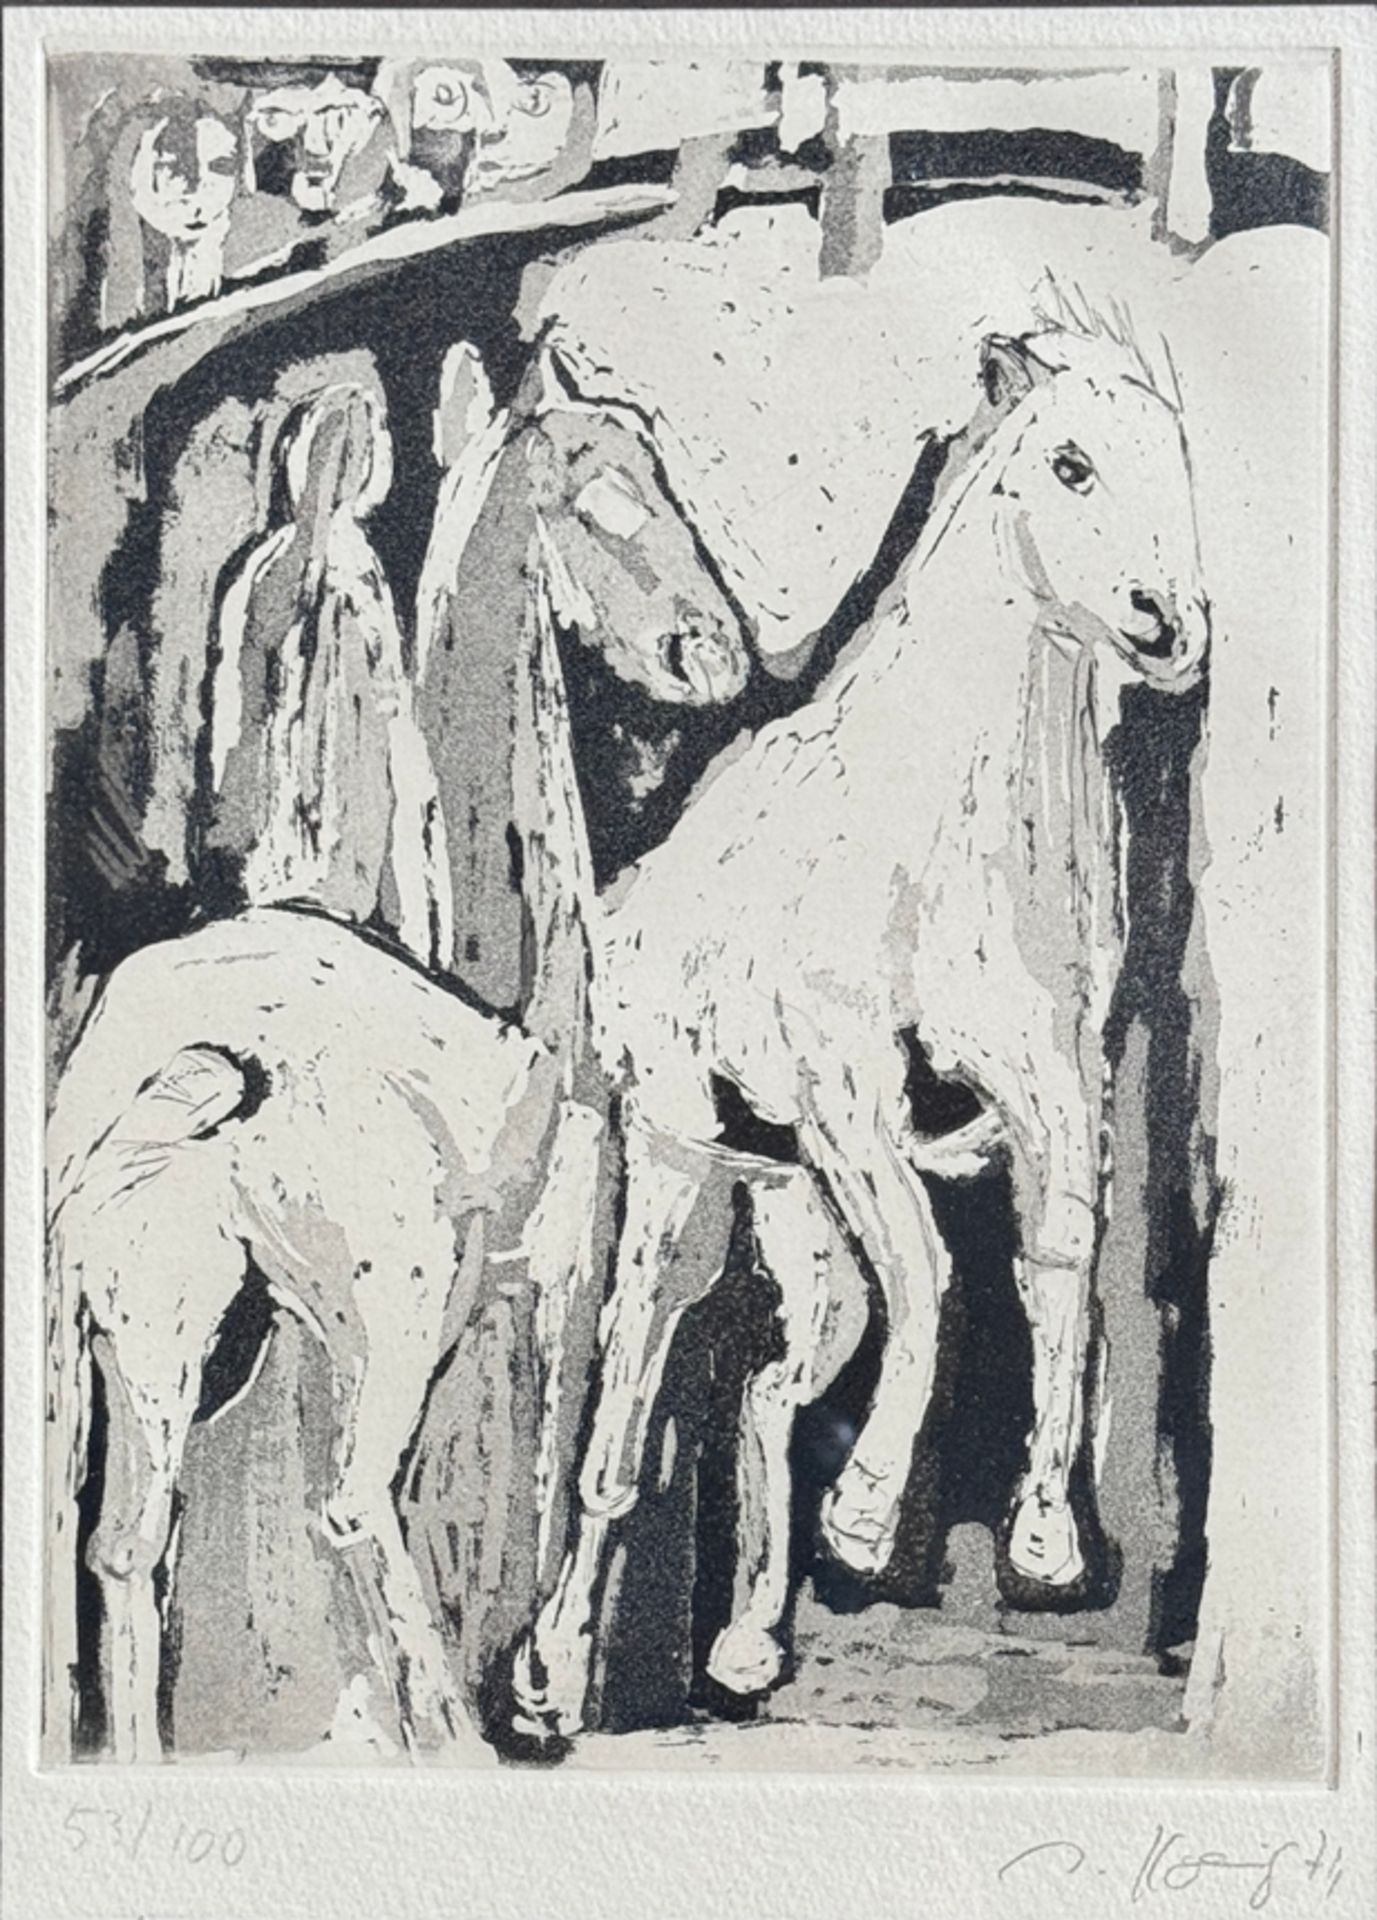 Unknown graphic artist (20th century) "Horses", etching, illegibly signed (Hoenig?) and dated "74"